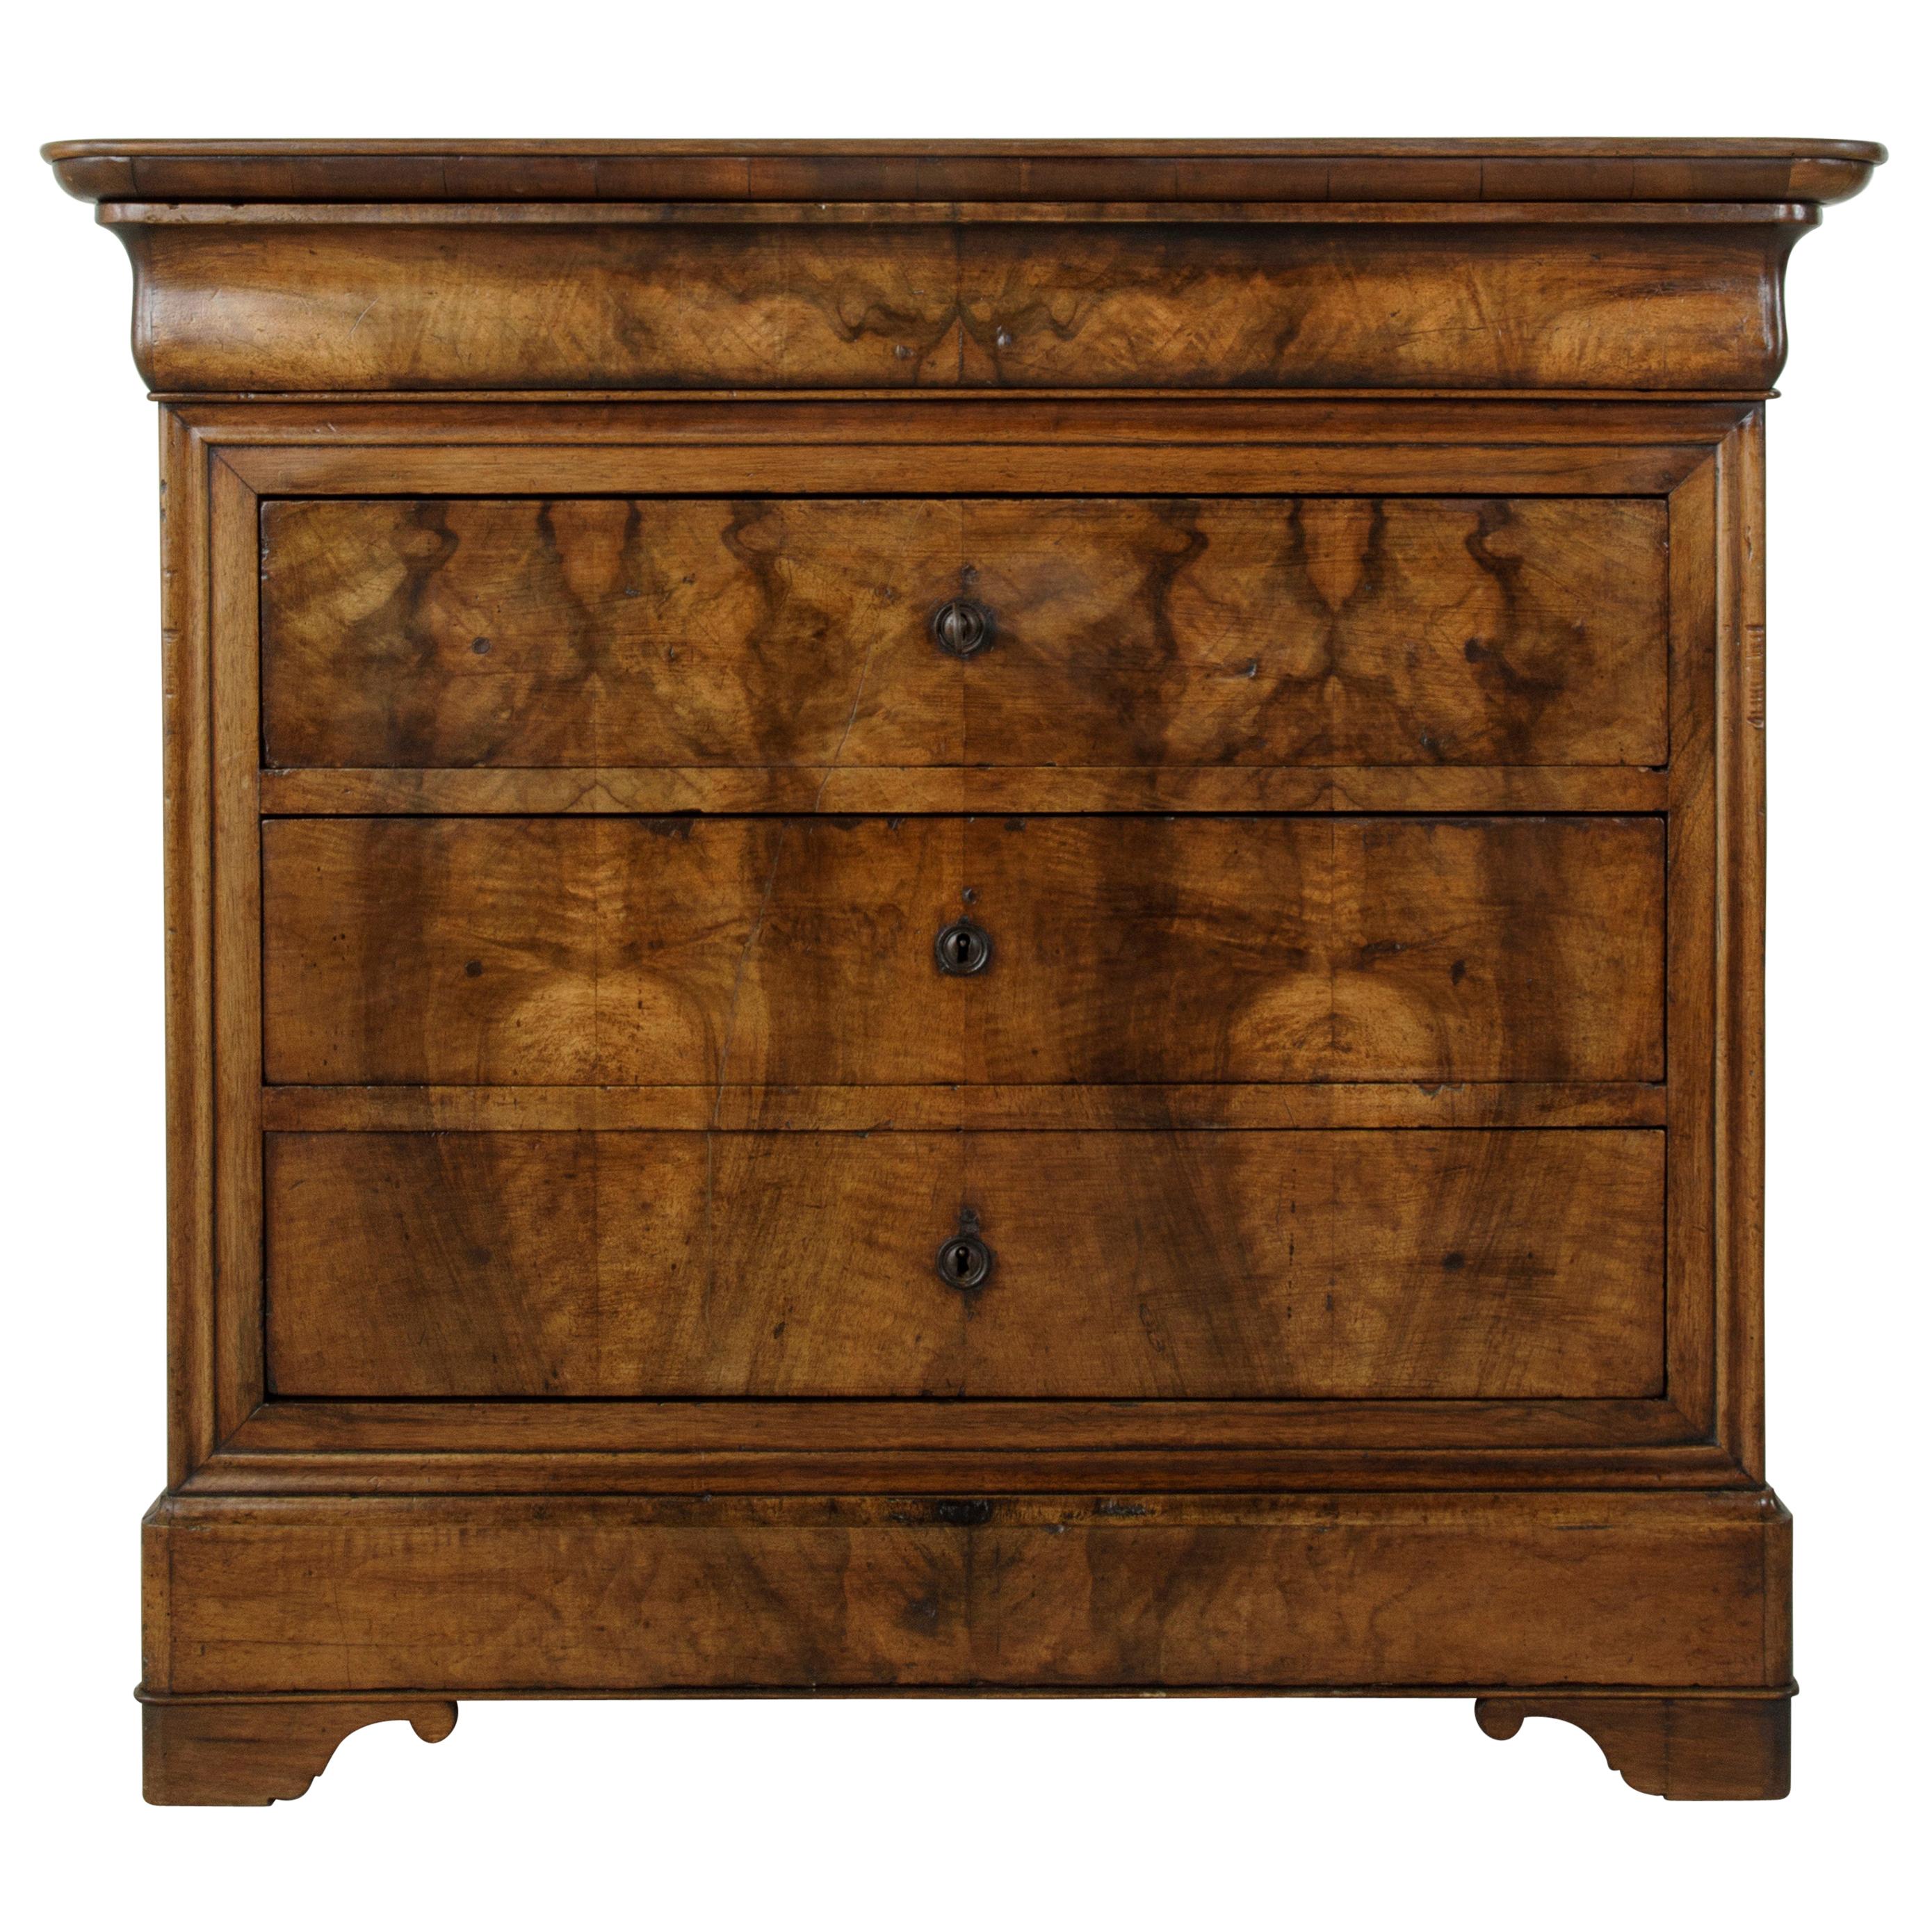 Small Scale 19th Century French Louis Philippe Period Walnut Commode or Chest